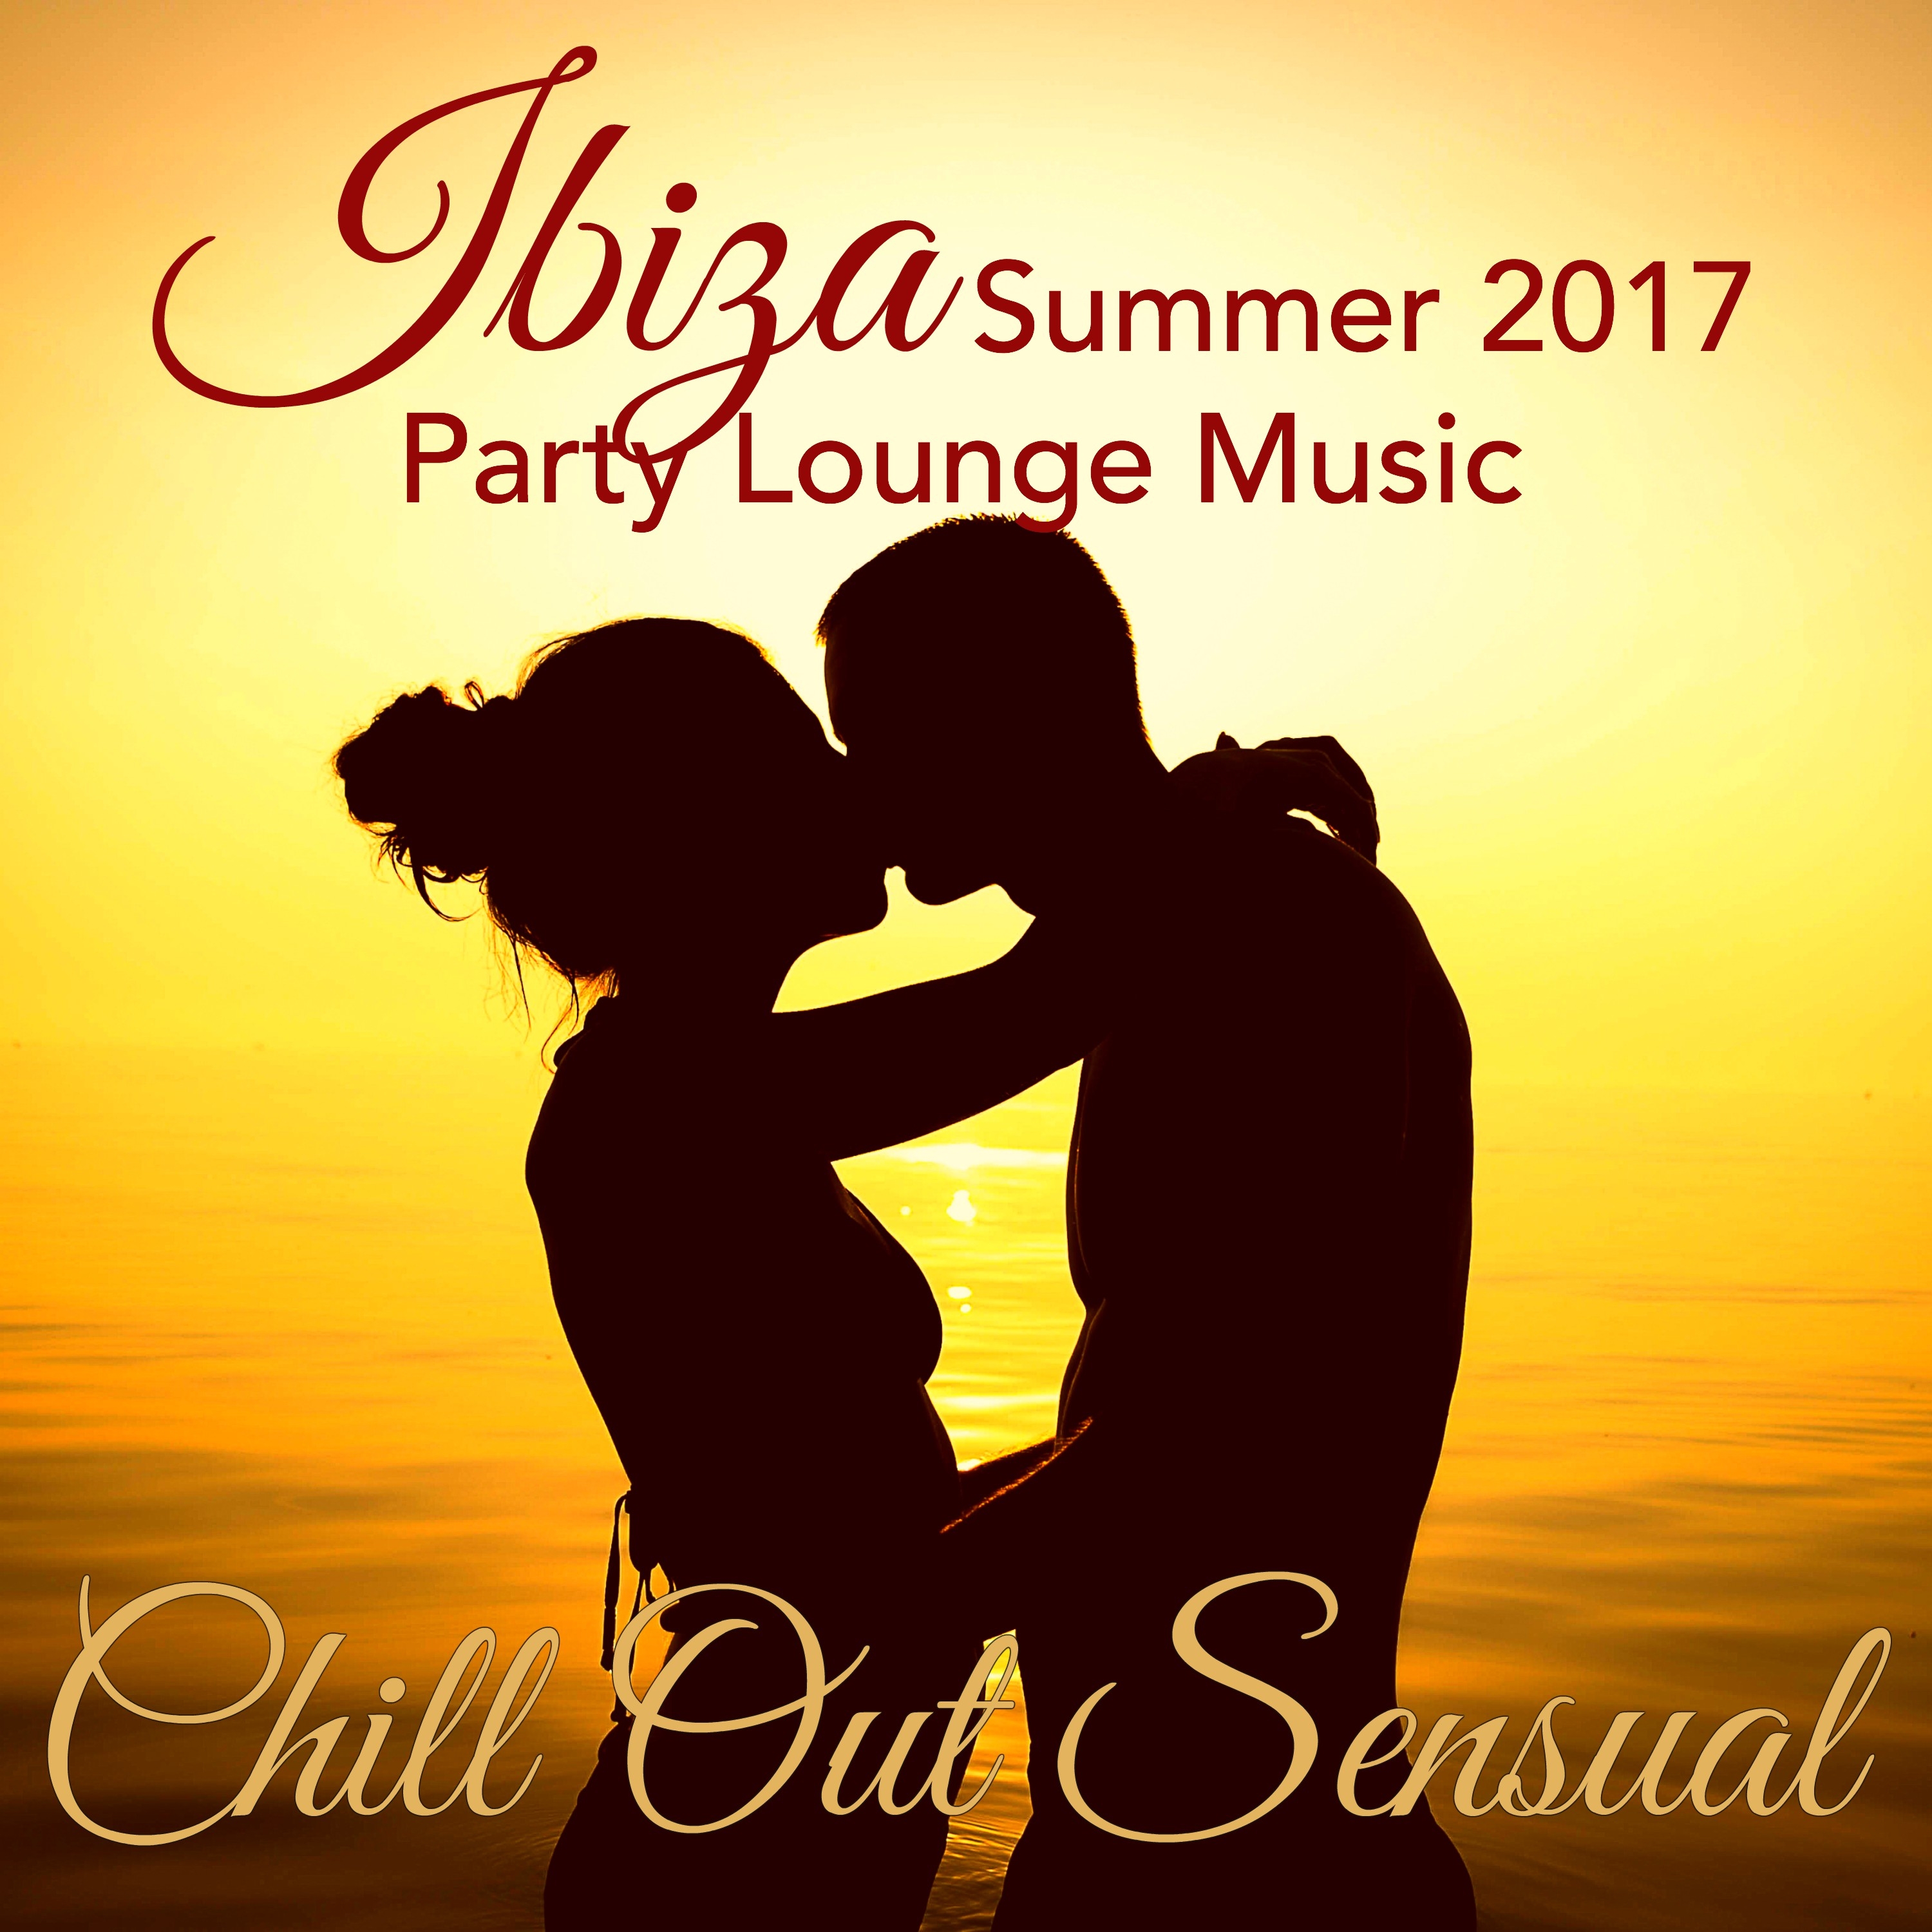 Summer - Chillout Lounge